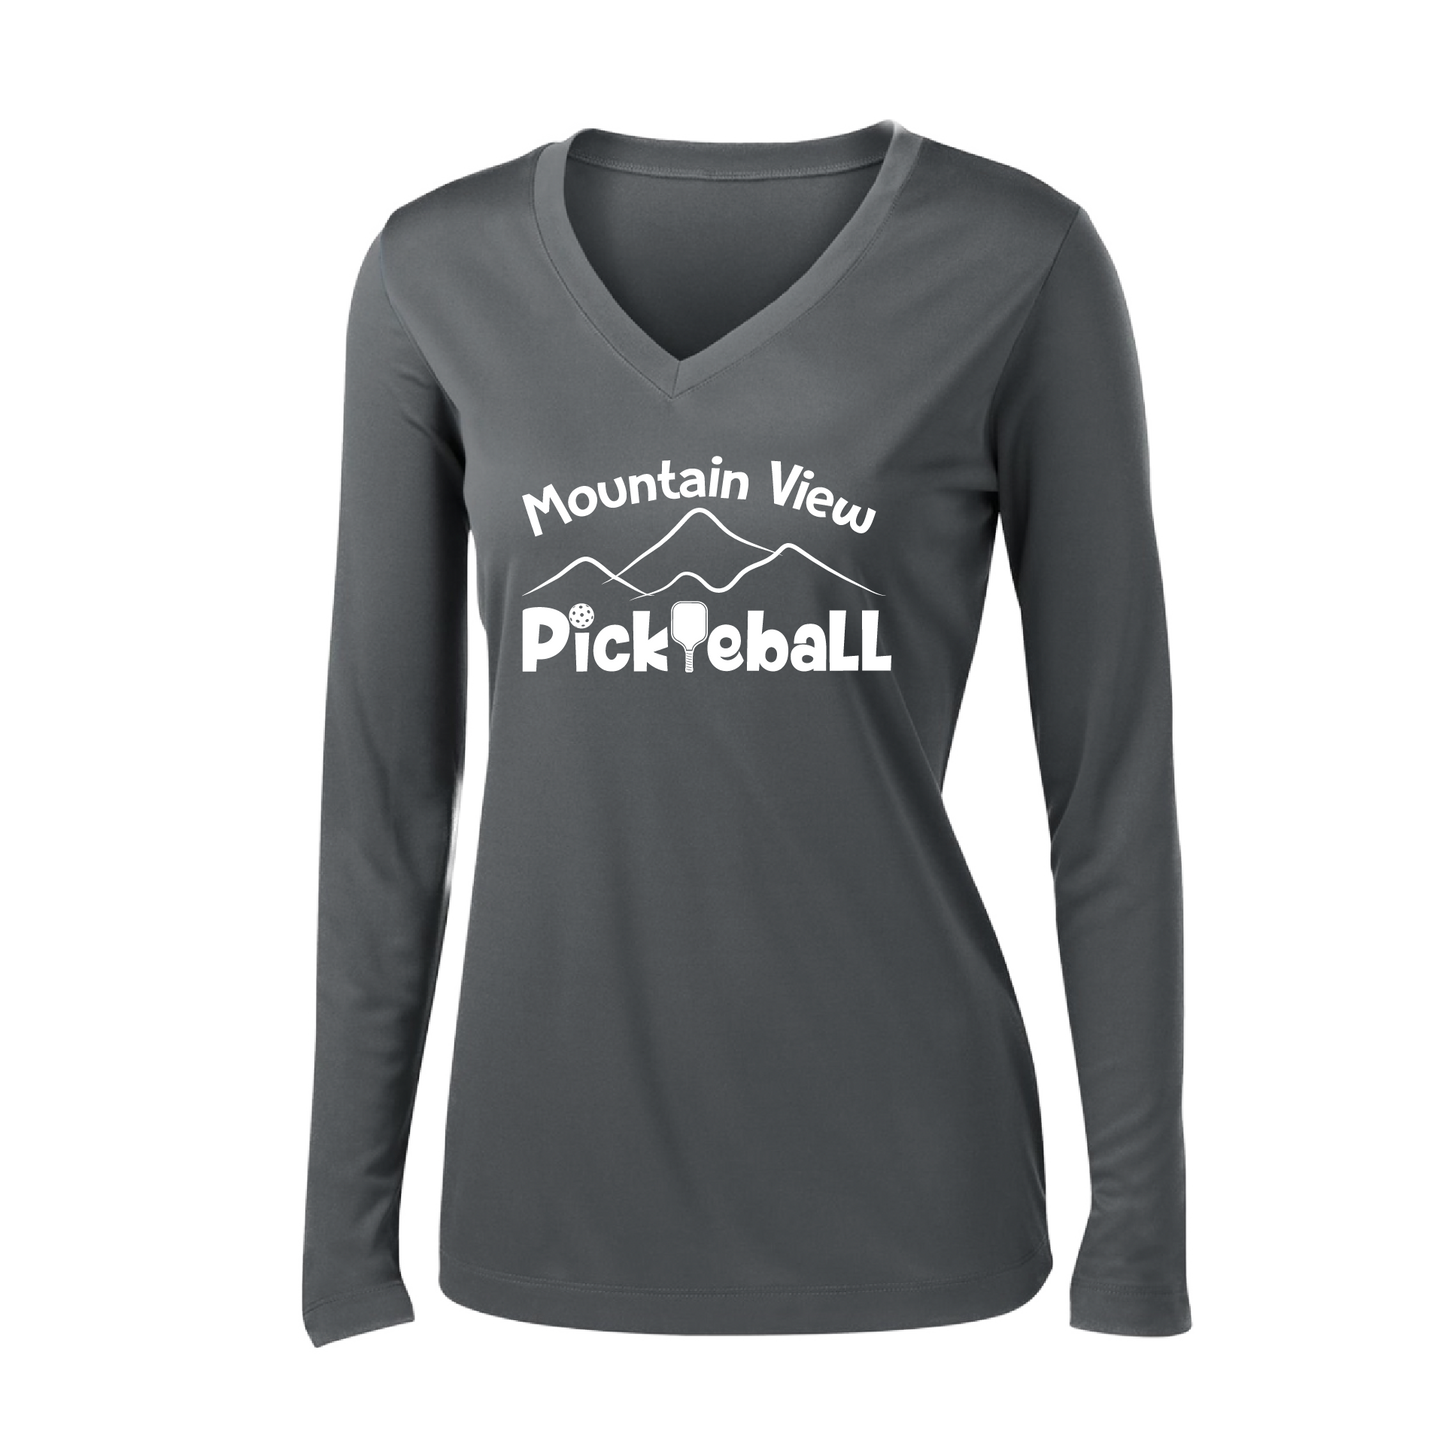 Pickleball Design: Mountain View Pickleball Club  Women's Style: Long-Sleeve V-Neck  Turn up the volume in this Women's shirt with its perfect mix of softness and attitude. Material is ultra-comfortable with moisture wicking properties and tri-blend softness. PosiCharge technology locks in color. Highly breathable and lightweight.